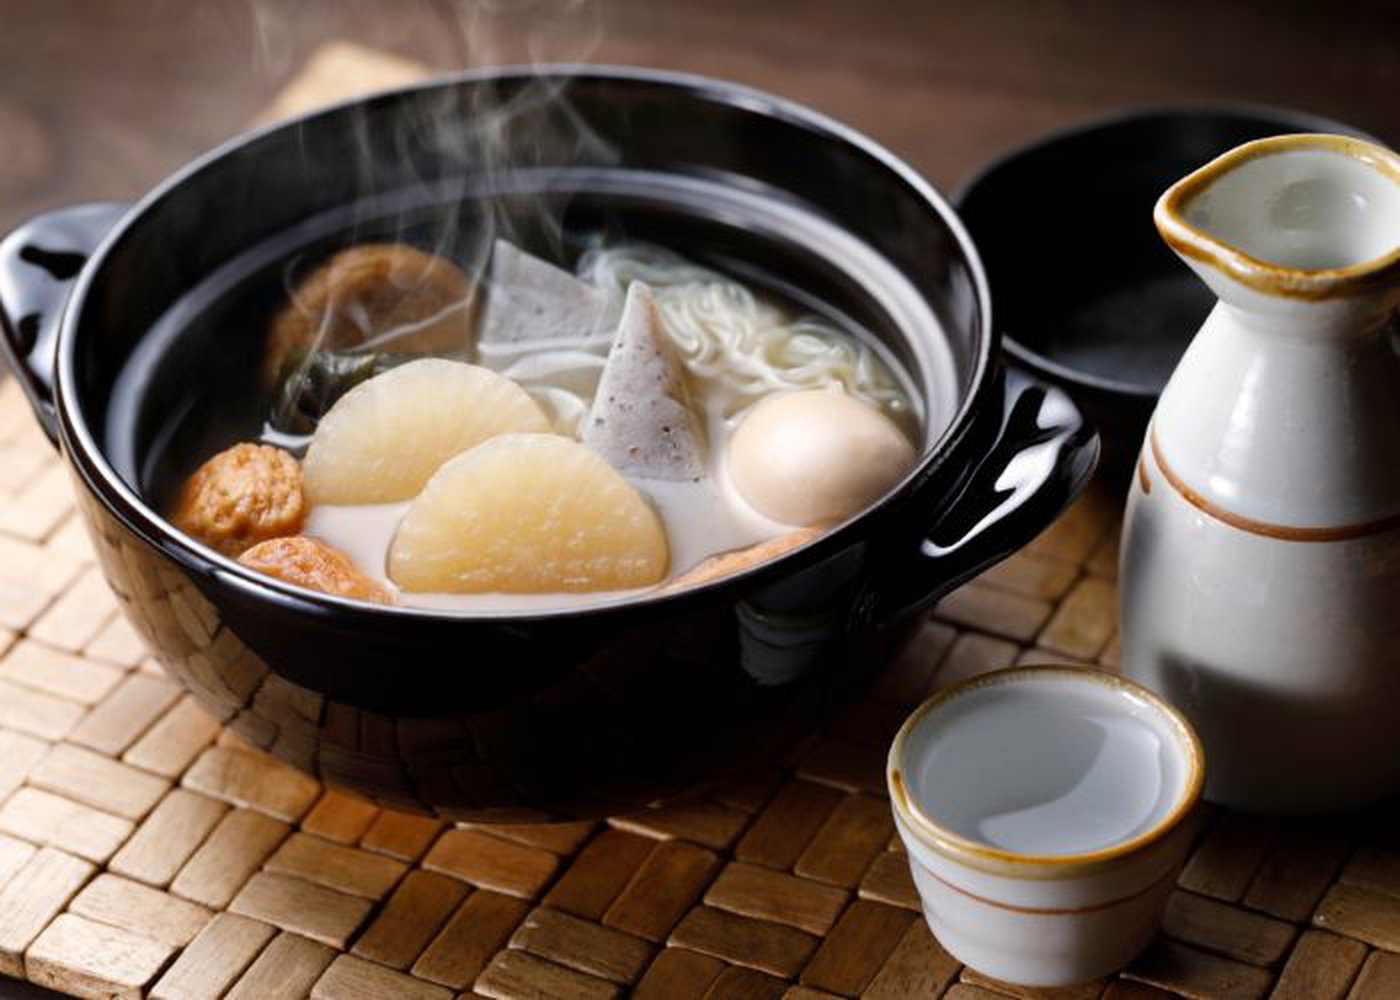 A bowl of steaming-hot oden served alongside sake, an autumn staple in Japan.